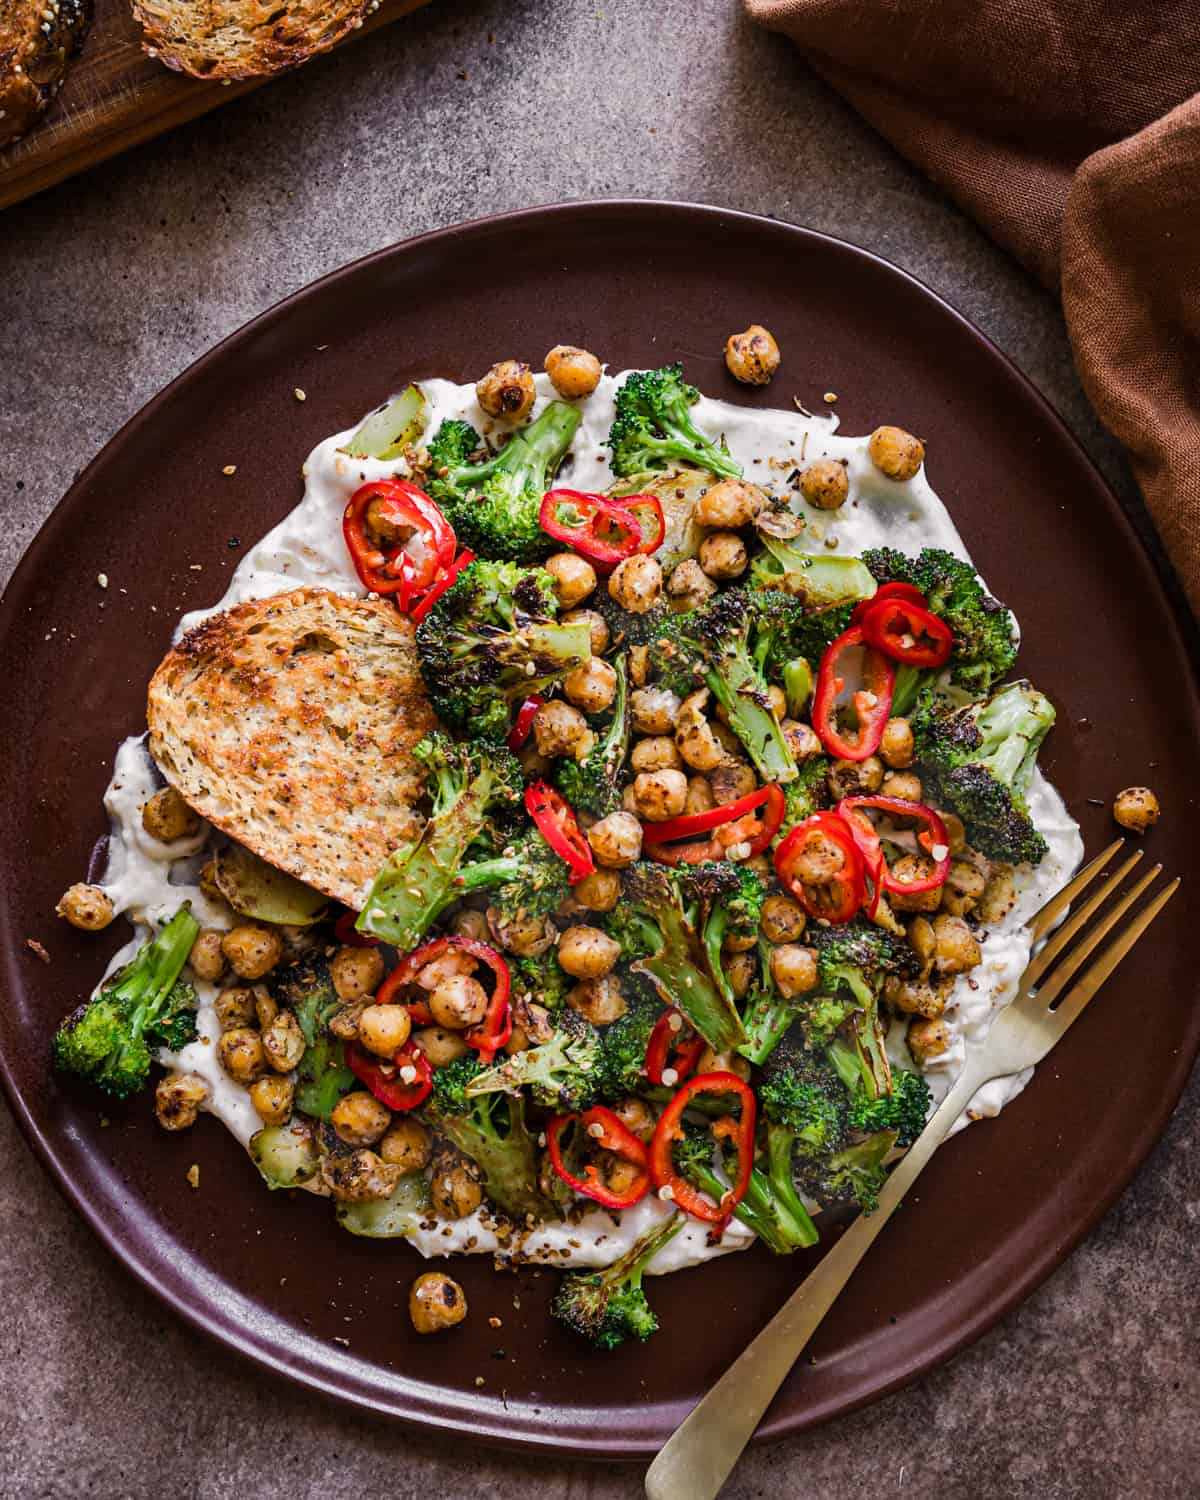 Charred broccoli and spiced chickpeas on yogurt sauce with bread on a brown plate with fork. 